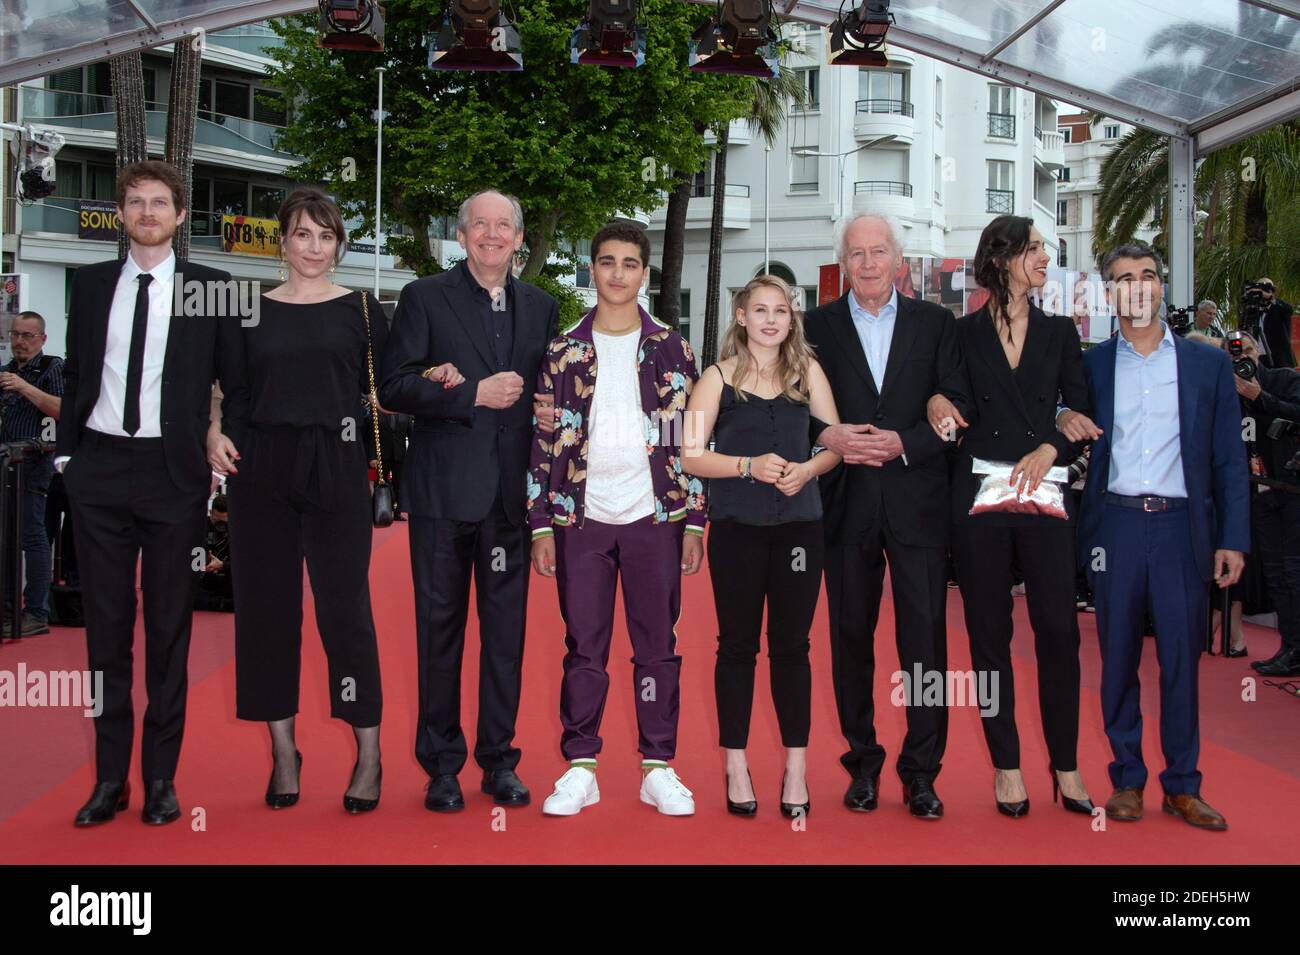 Othmane Moumen, Myriem Akheddiou, Jean-Pierre Dardenne, Victoria Bluck, Idir Ben Addi, Luc Dardenne, Carol Duarte and Olivier Bonnaud attending the Le Jeune Ahmed Premiere as part of the 72nd Cannes International Film Festival in Cannes, France on May 19, 2019. Photo by Aurore Marechal/ABACAPRESS.COM Stock Photo